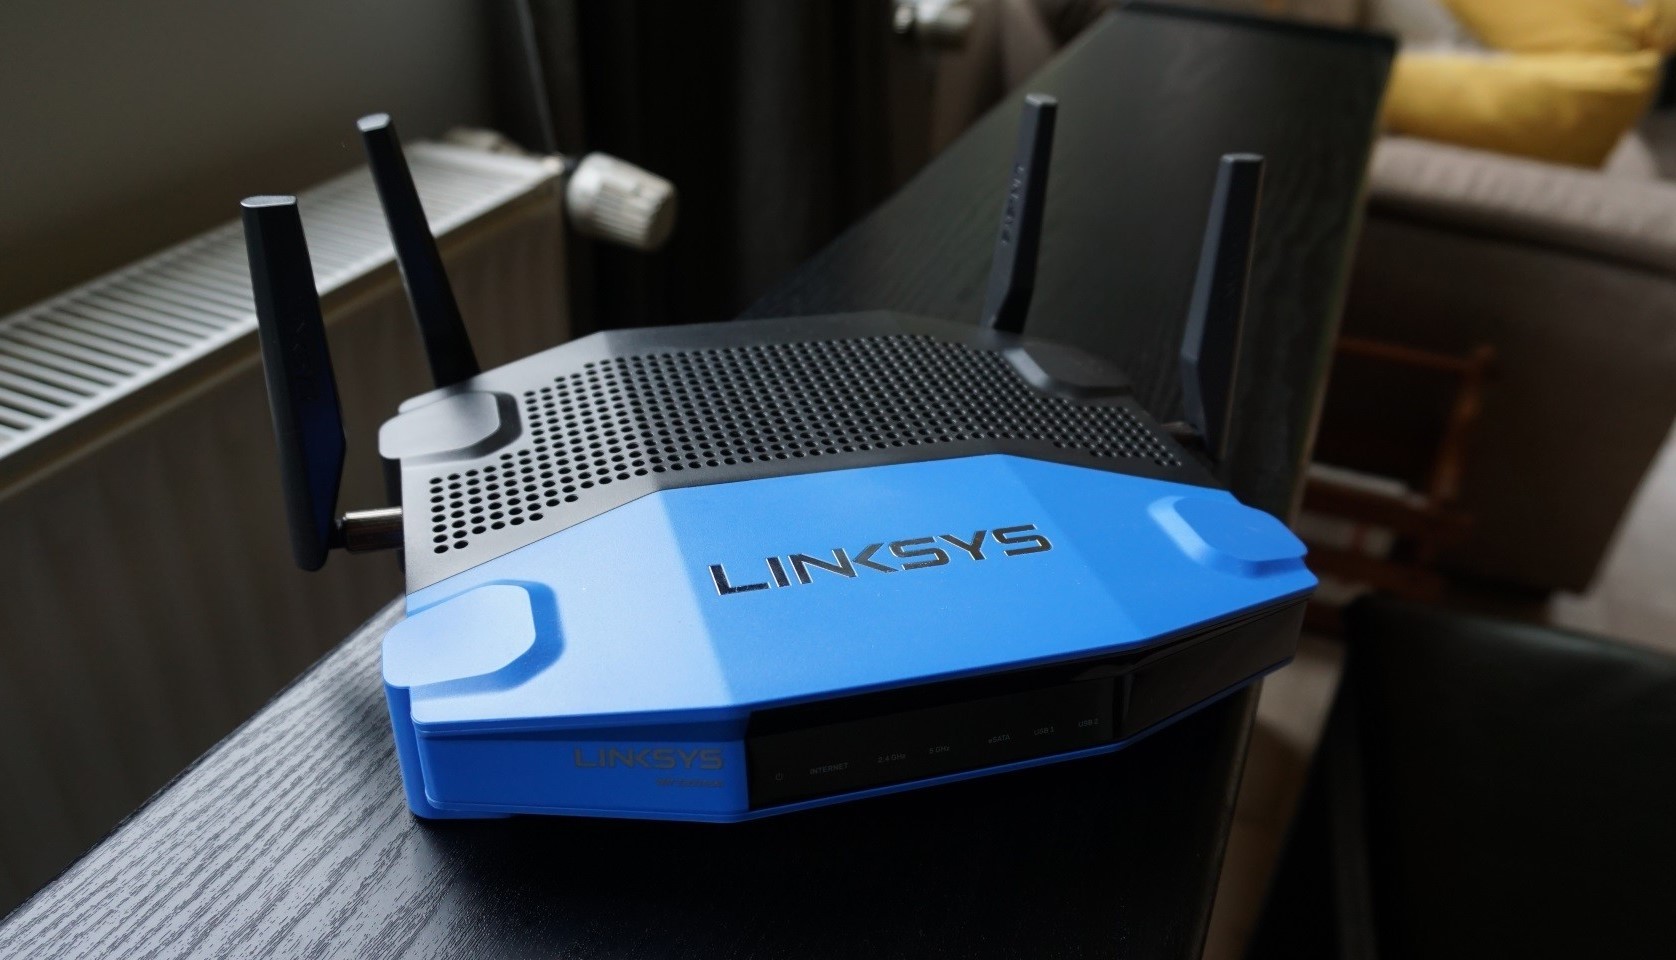 How To Set Up Linksys Wi-Fi Router